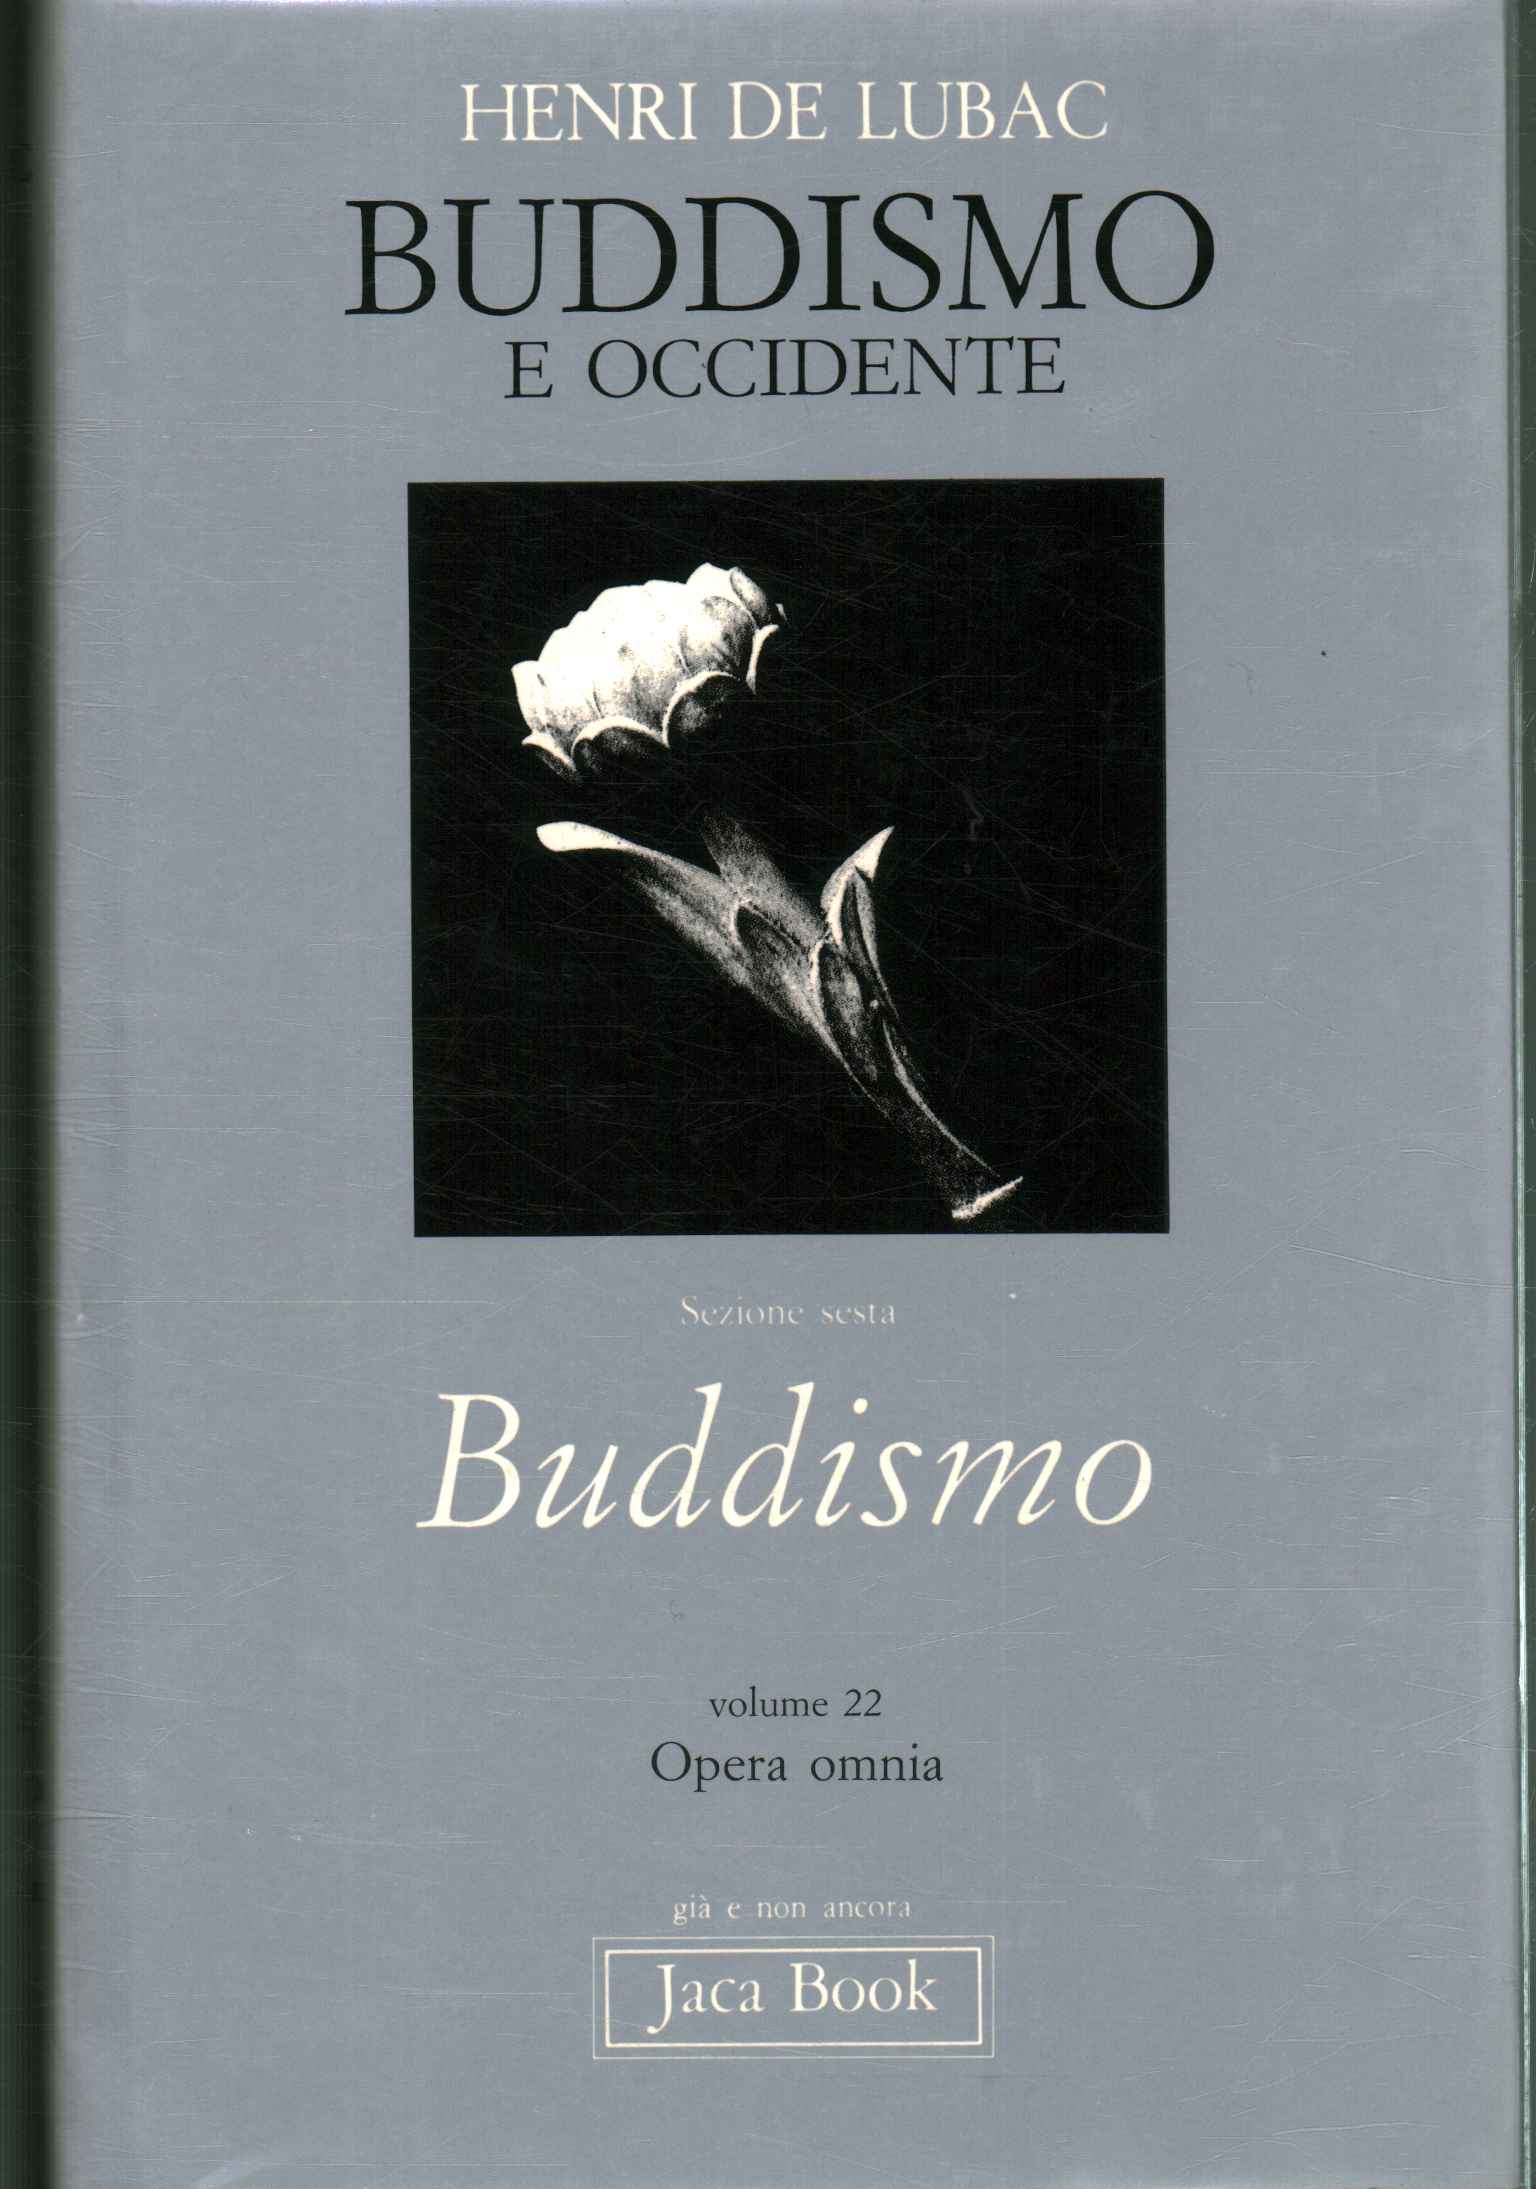 Buddhism and the West. Buddhism (Volume 2